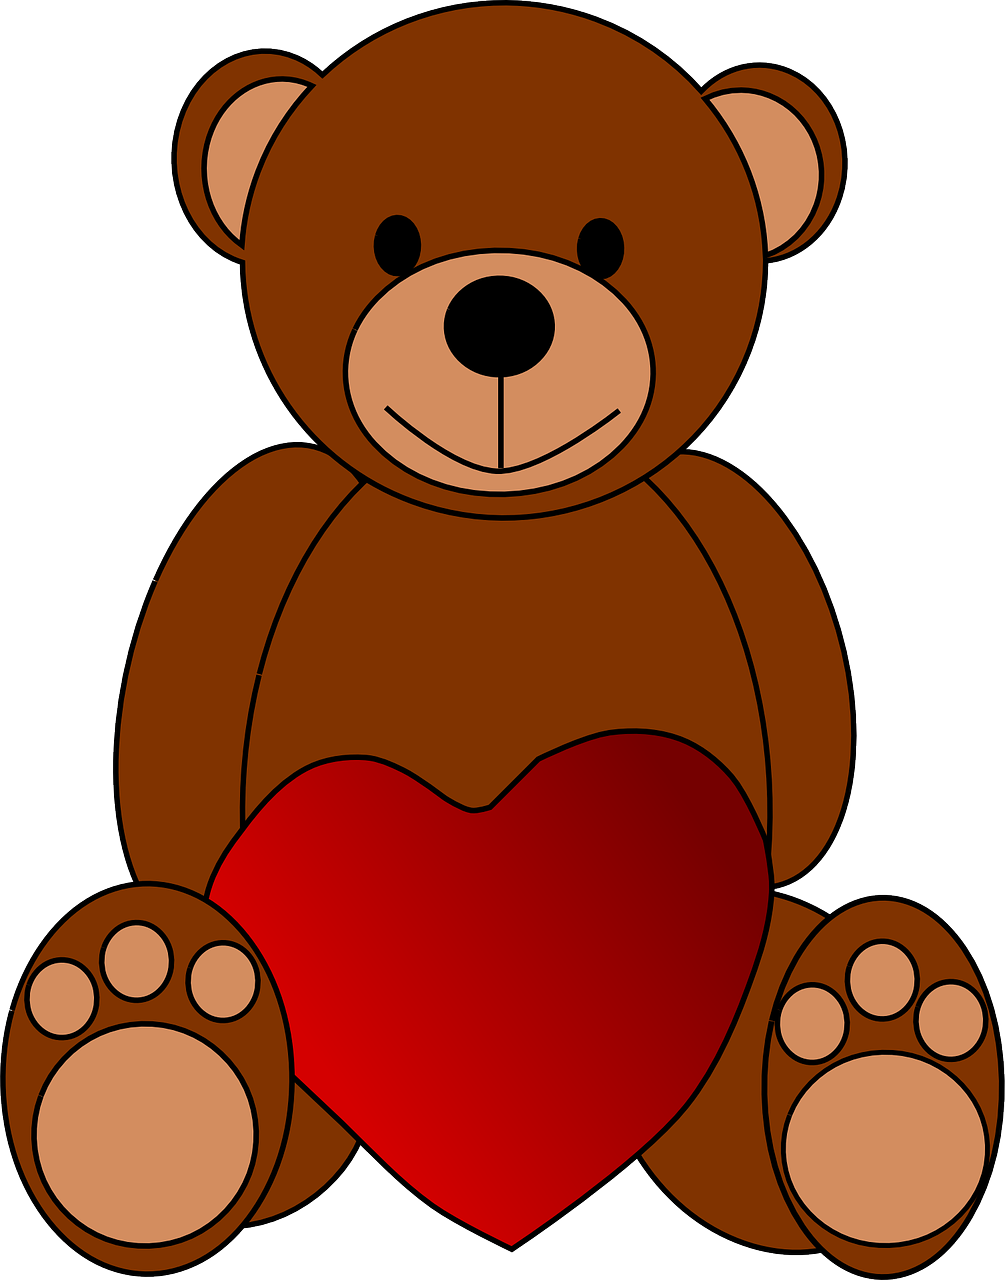 a brown teddy bear holding a red heart, a cartoon, brown:-2, full colored, solid, full heart - shaped face